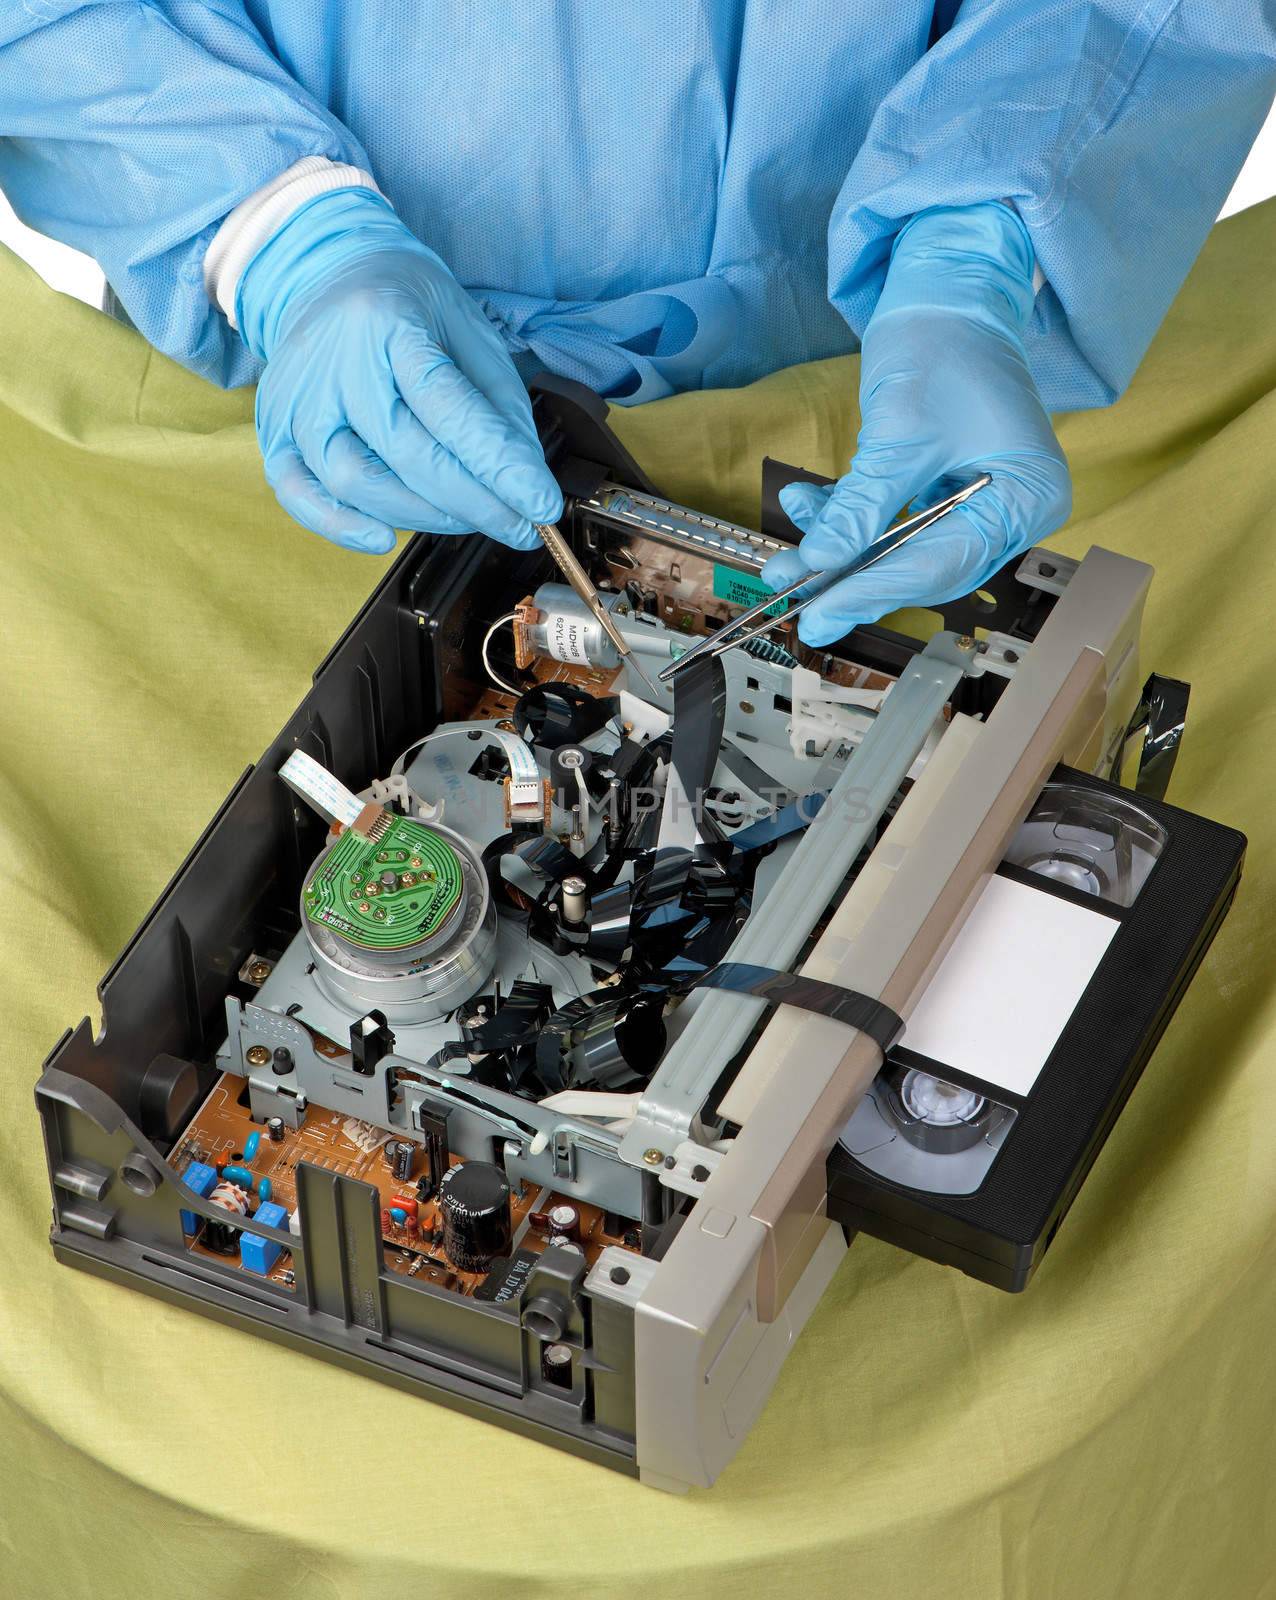 A surgeon tries to revive old technology in the shape of a tangled VHS cassette tape.